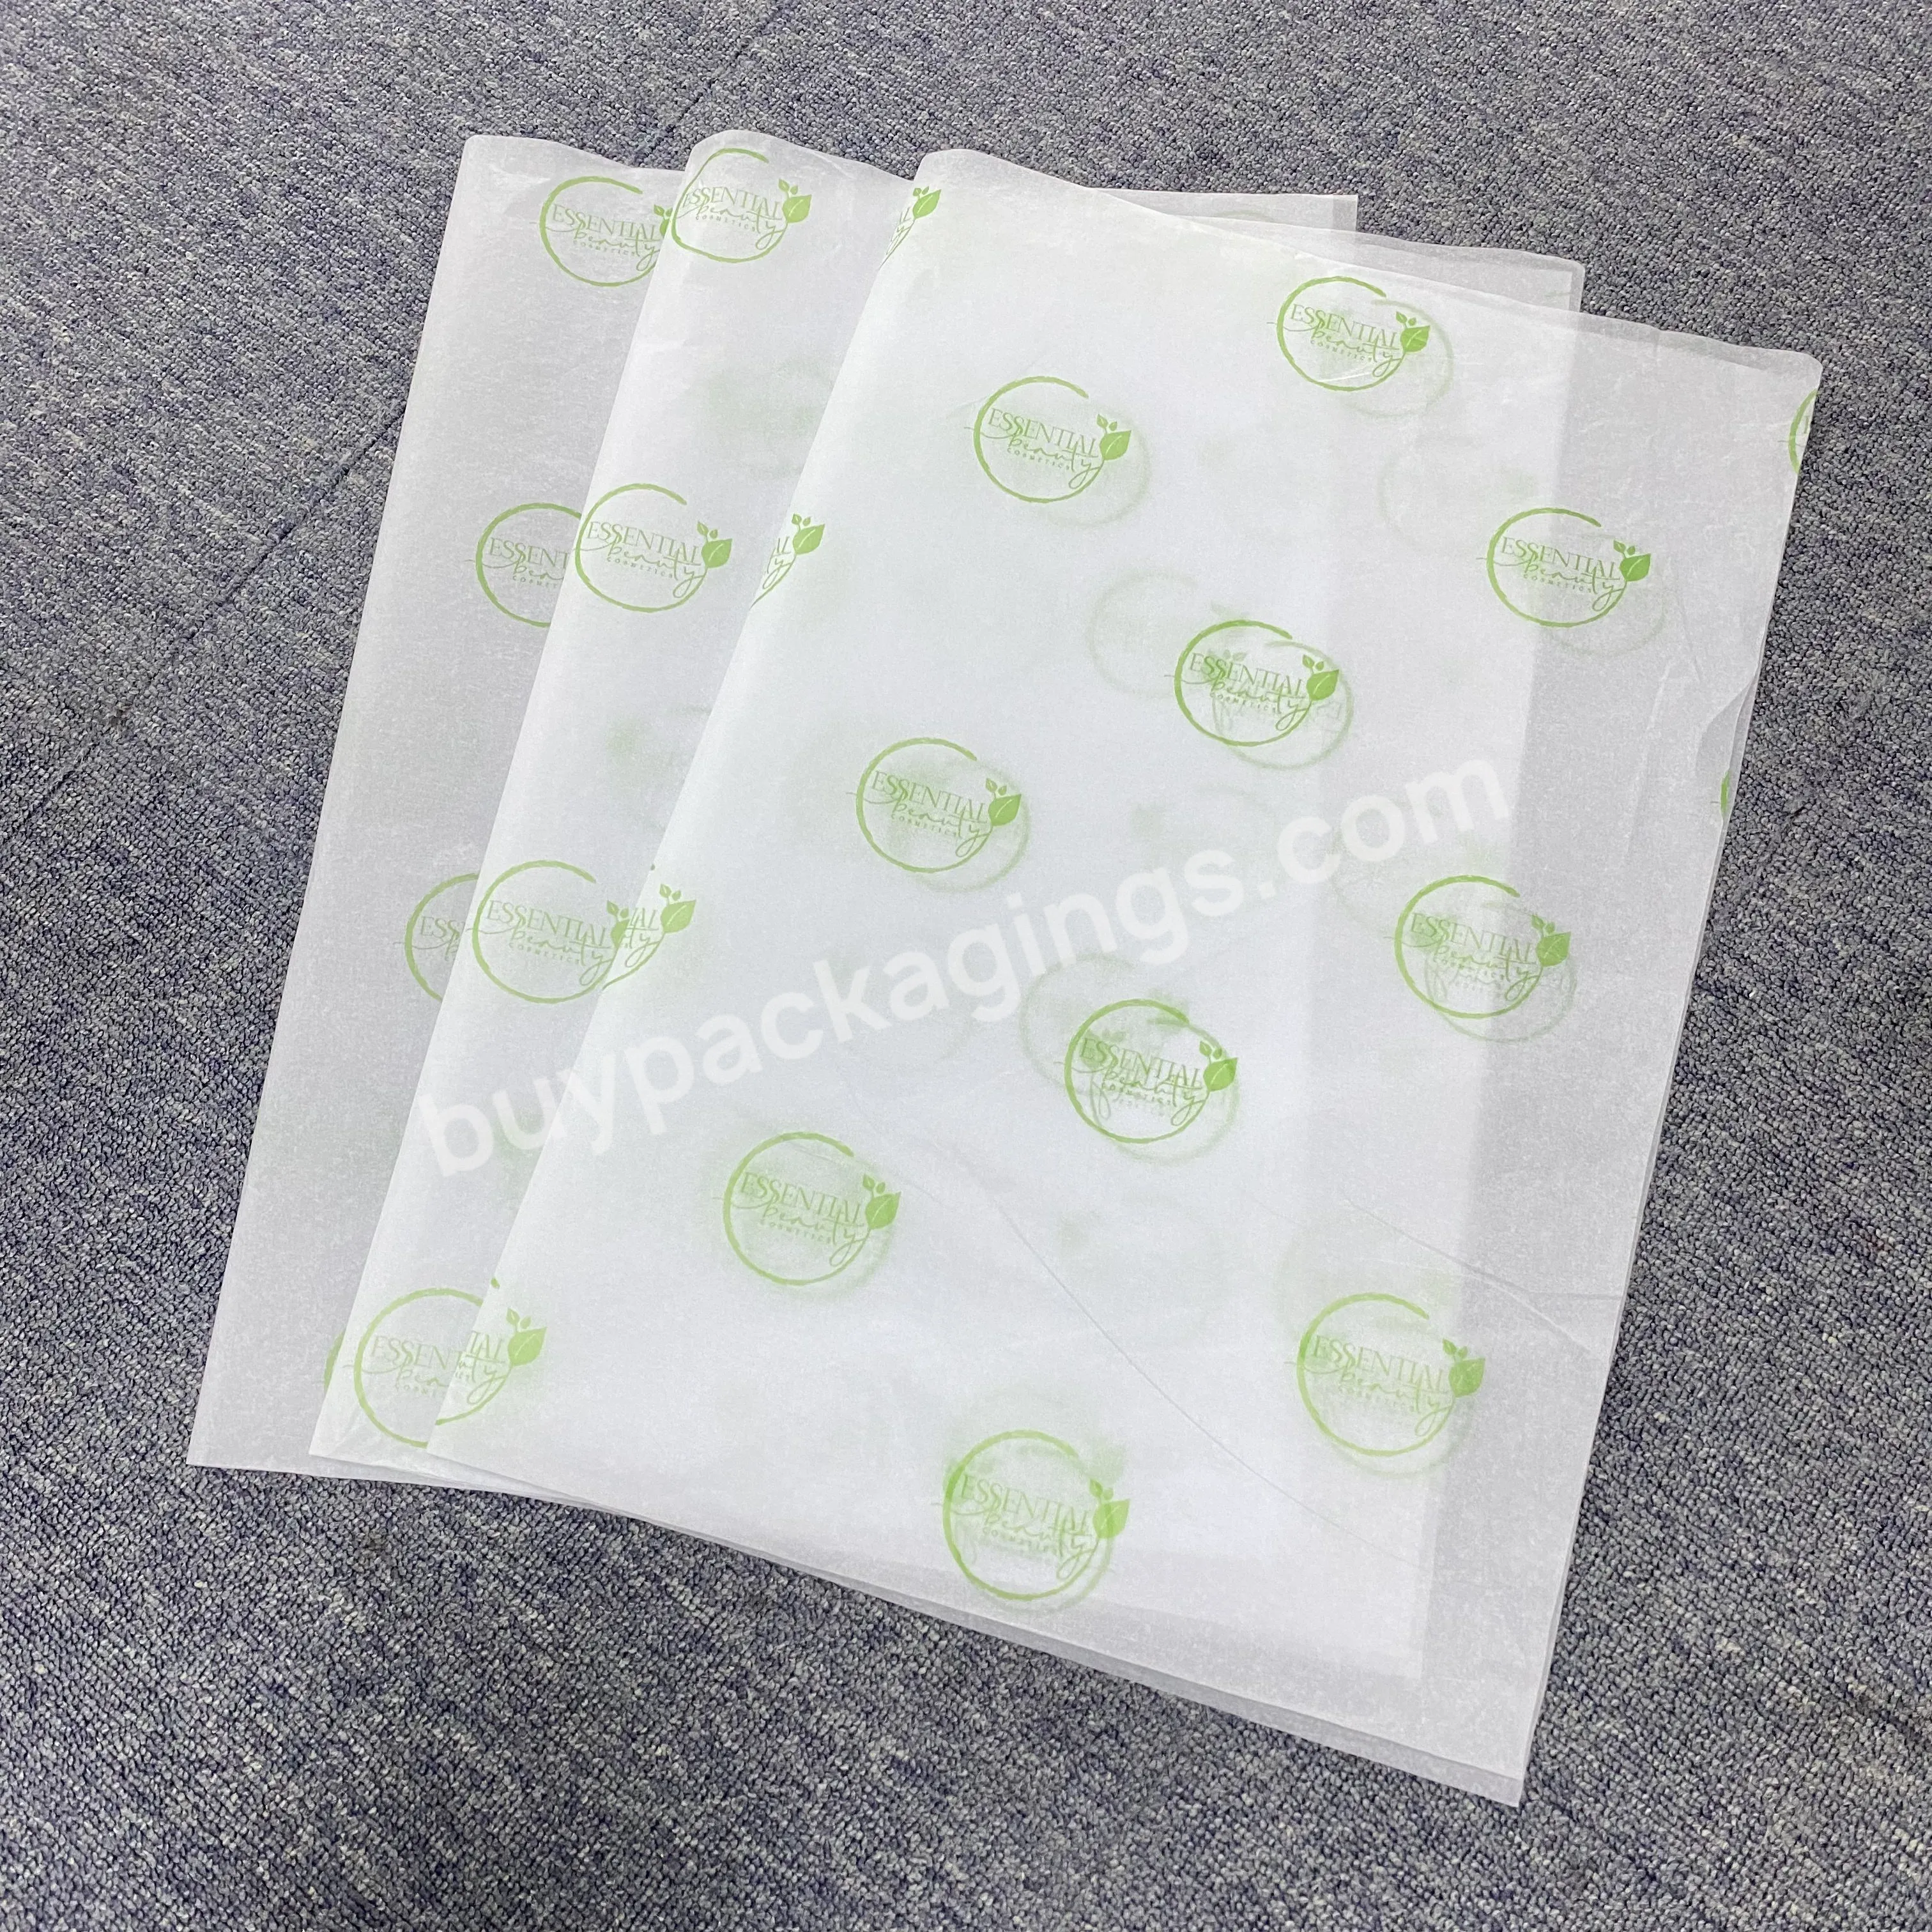 Low Moq 50*70cm Wrapping Tissue Paper Custom Size Logo Print Eco-friendly Gift Packaging Bag Tissue Modern Design